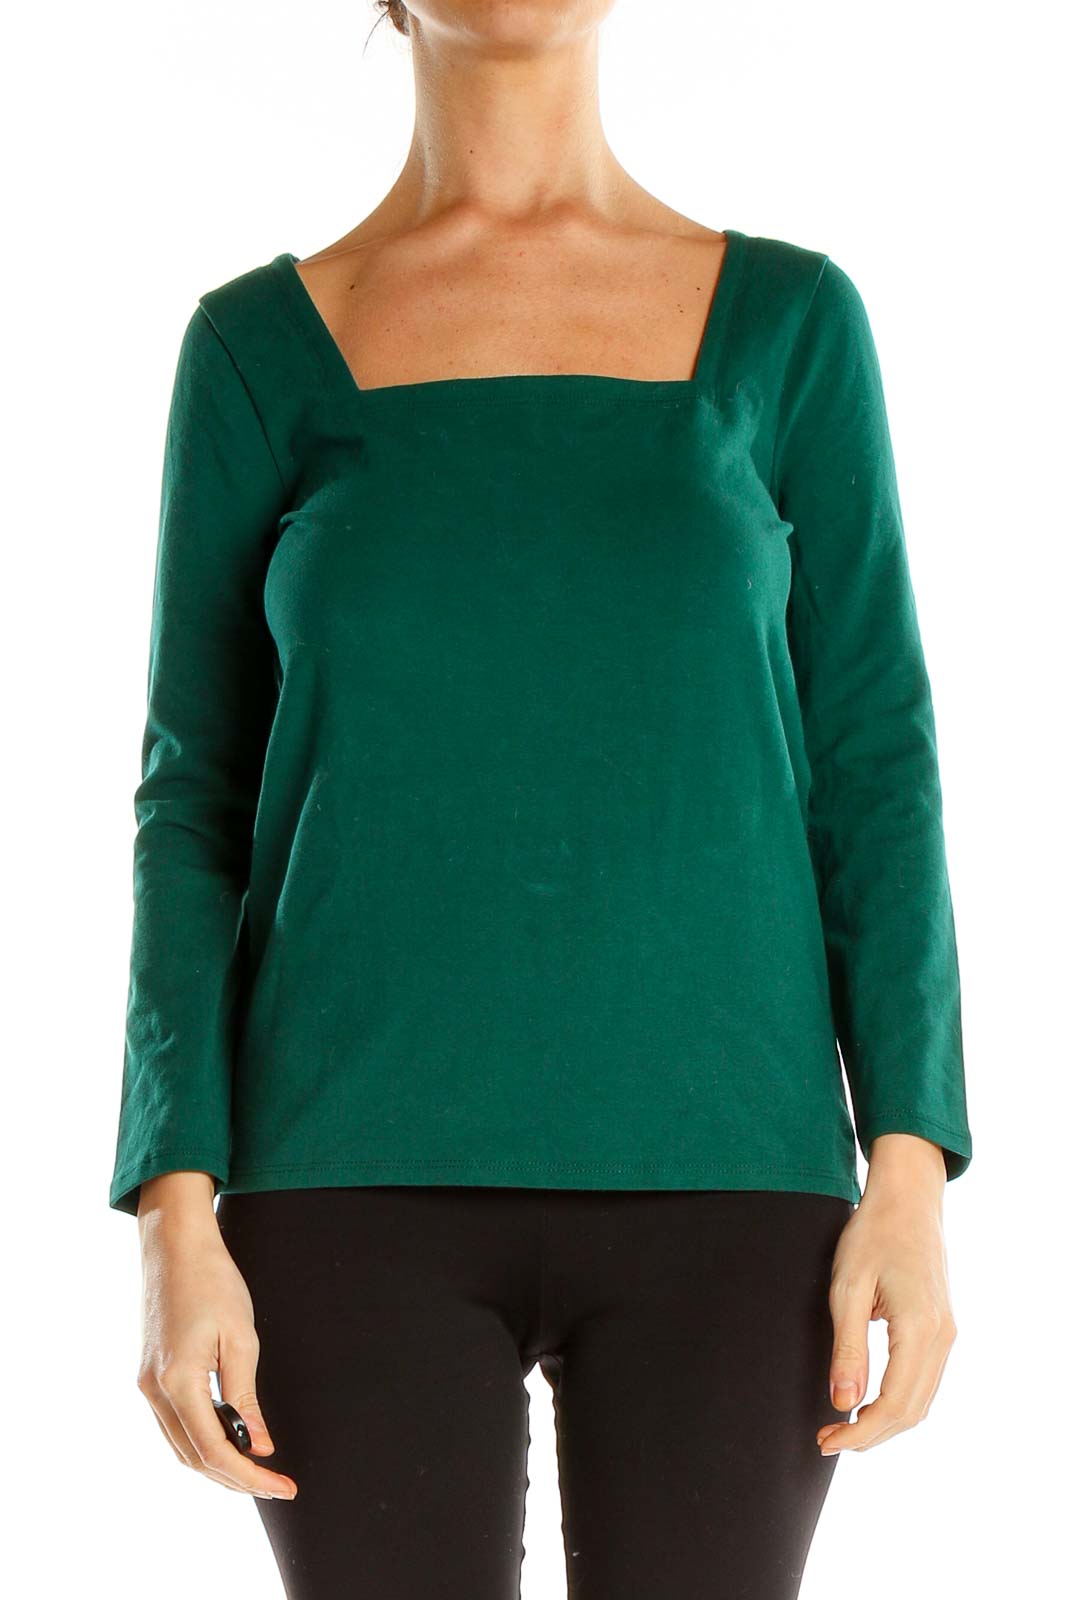 Green Square Neck All Day Wear Top Front